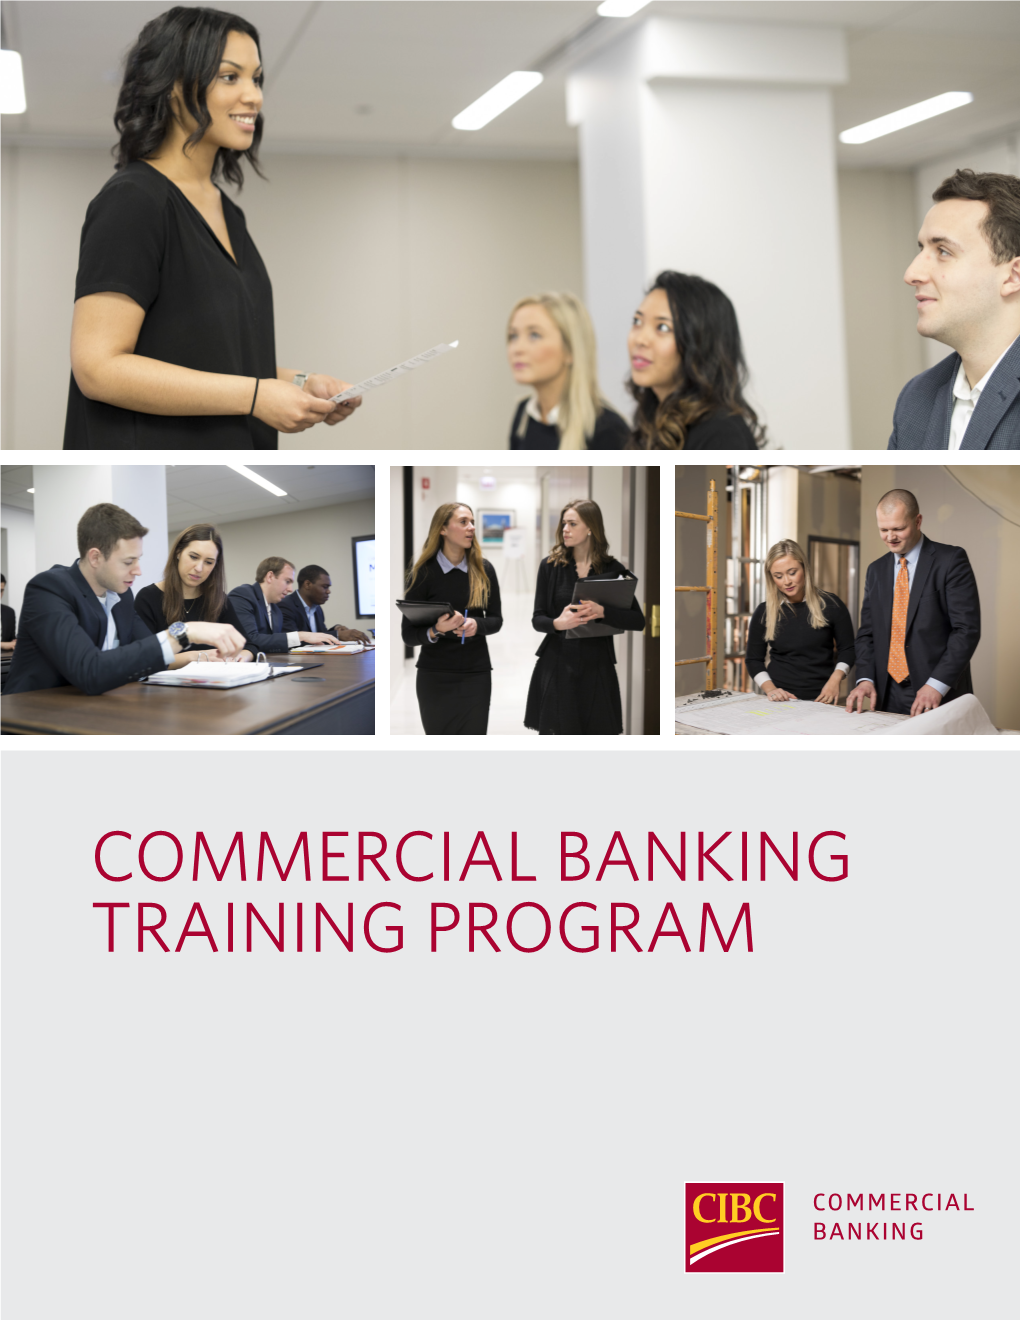 COMMERCIAL BANKING TRAINING PROGRAM Message from Michael G